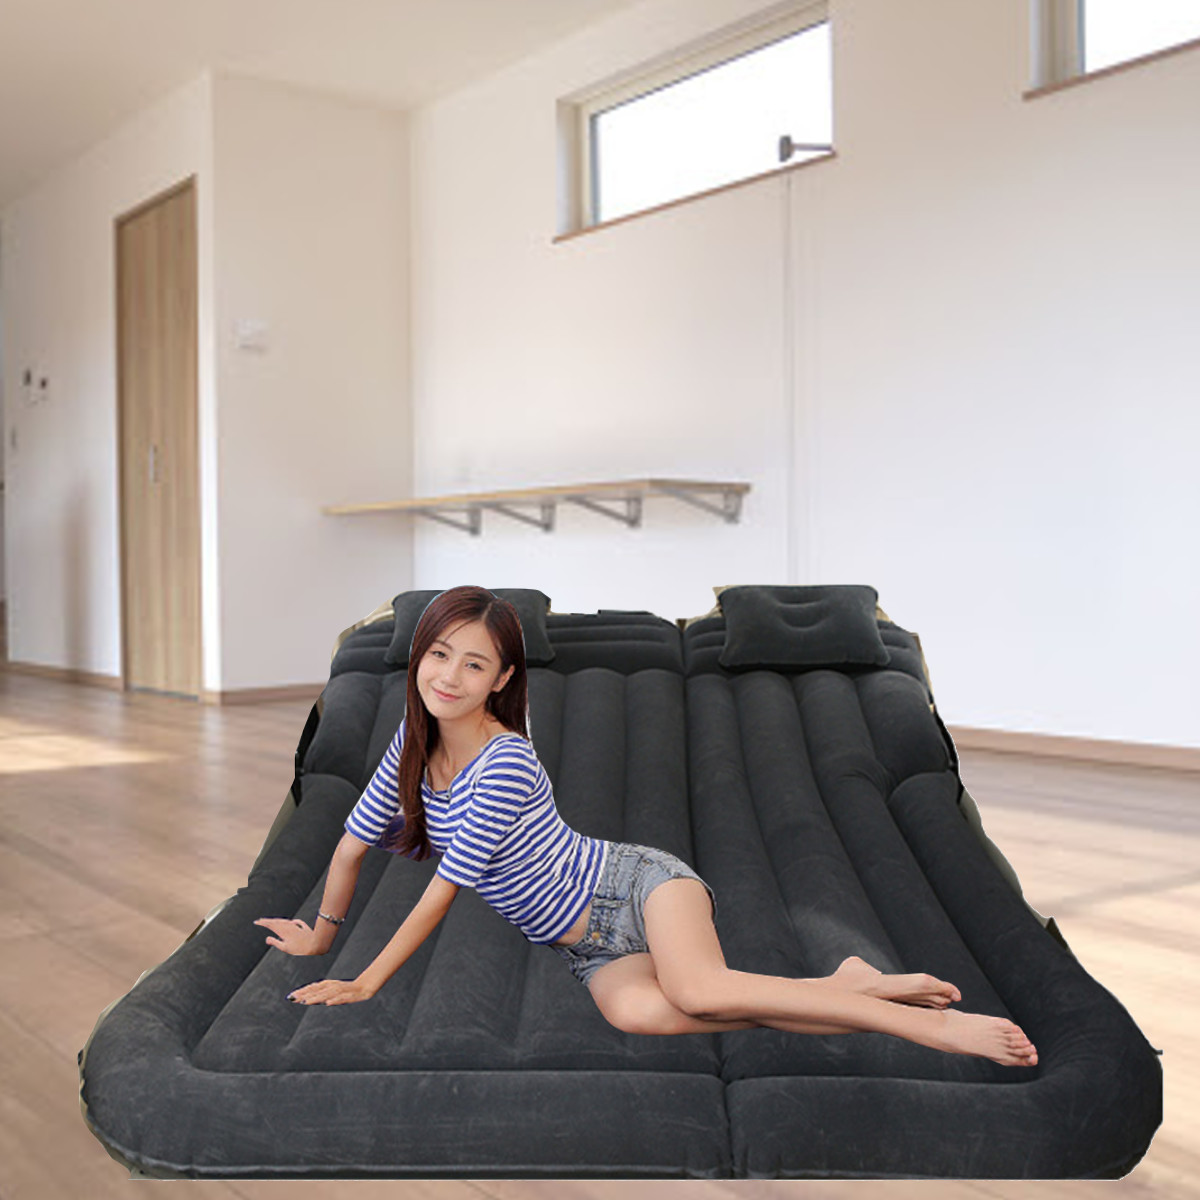 180x130cm-Multifunctional-Inflatable-Car-Air-Mattress-Durable-Back-Seat-Cover-Travel-Bed-Moisture-pr-1888970-8